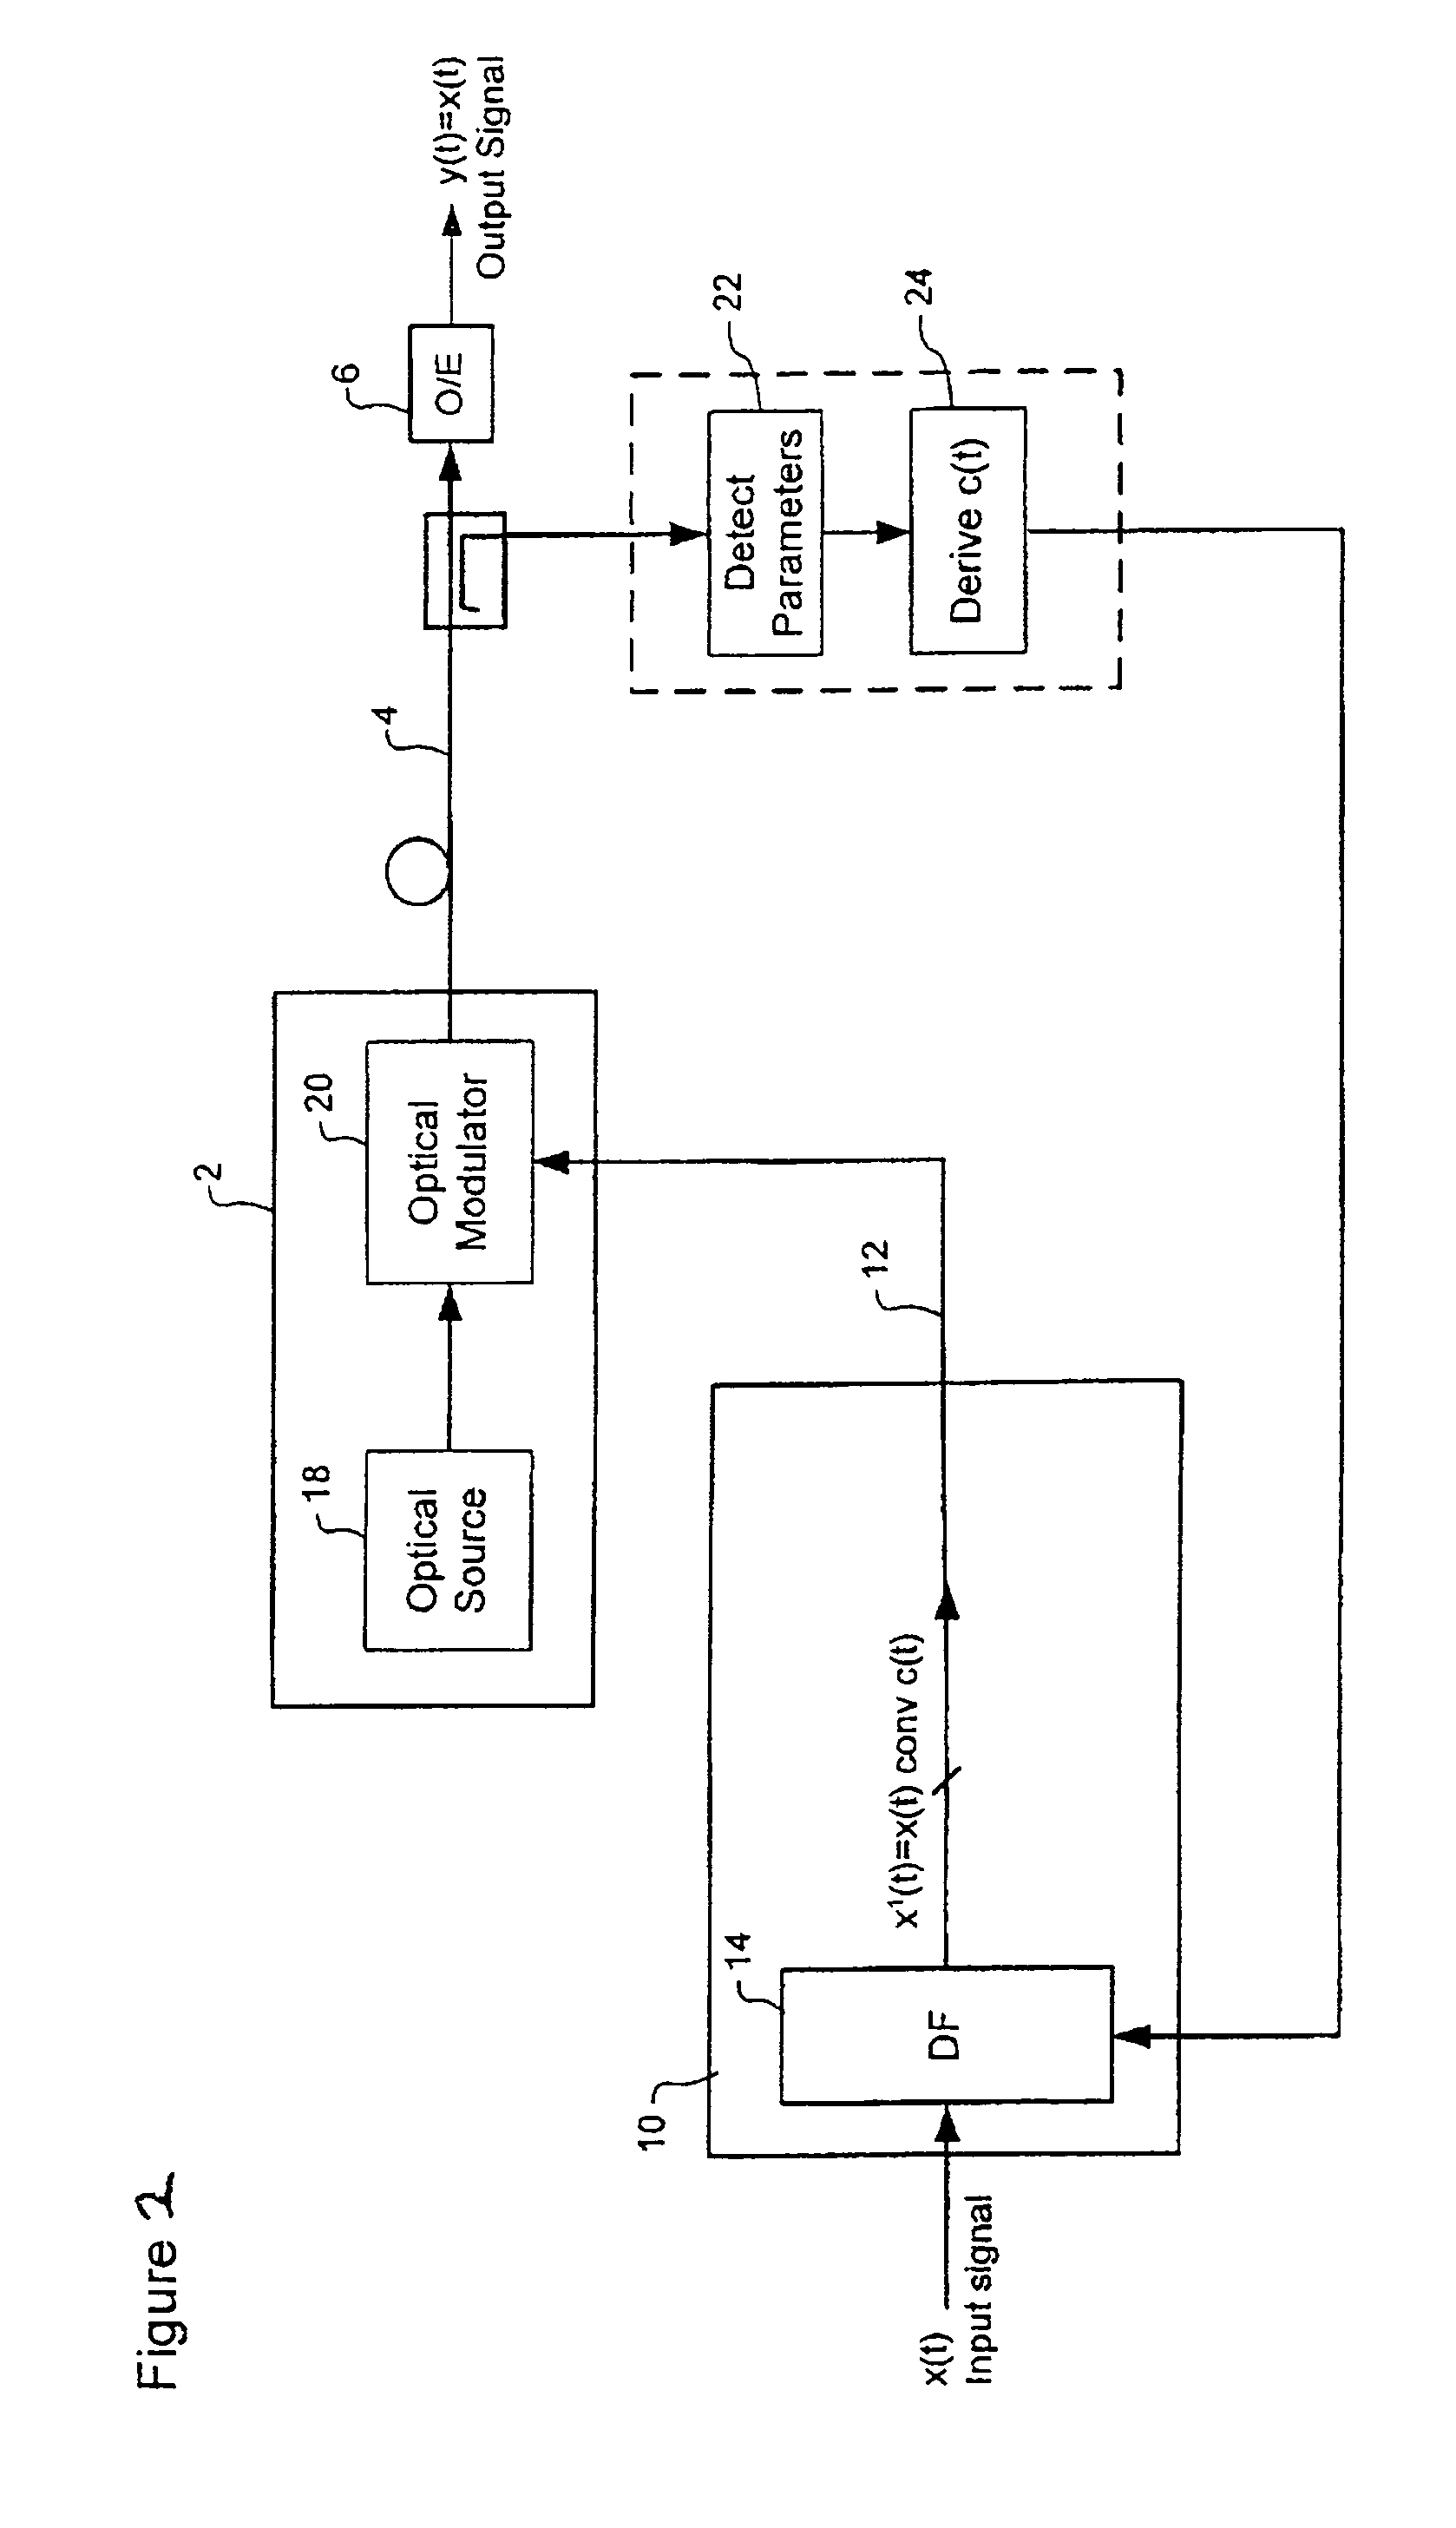 Optical laser control for optical communications systems